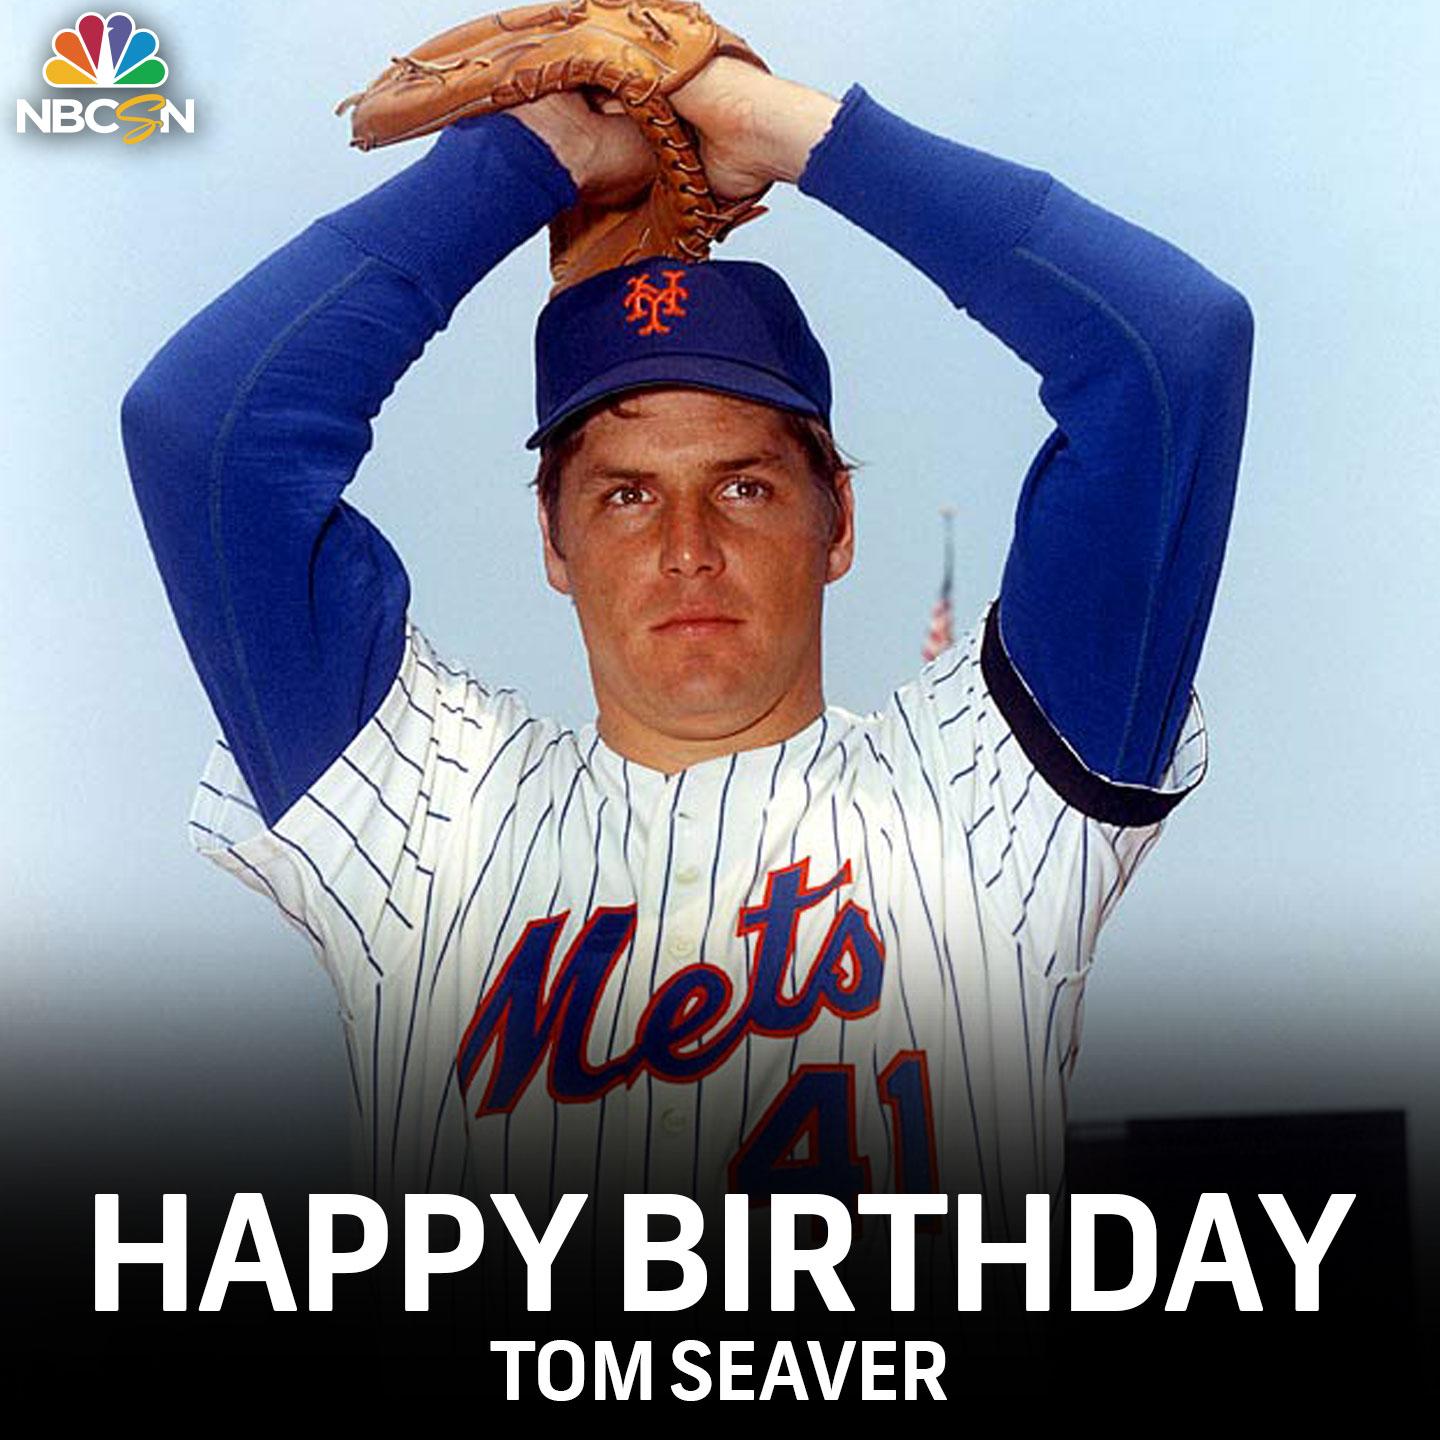 Happy Birthday to 12-time All-Star and 3-time NL Cy Young Award Winner TOM SEAVER! 